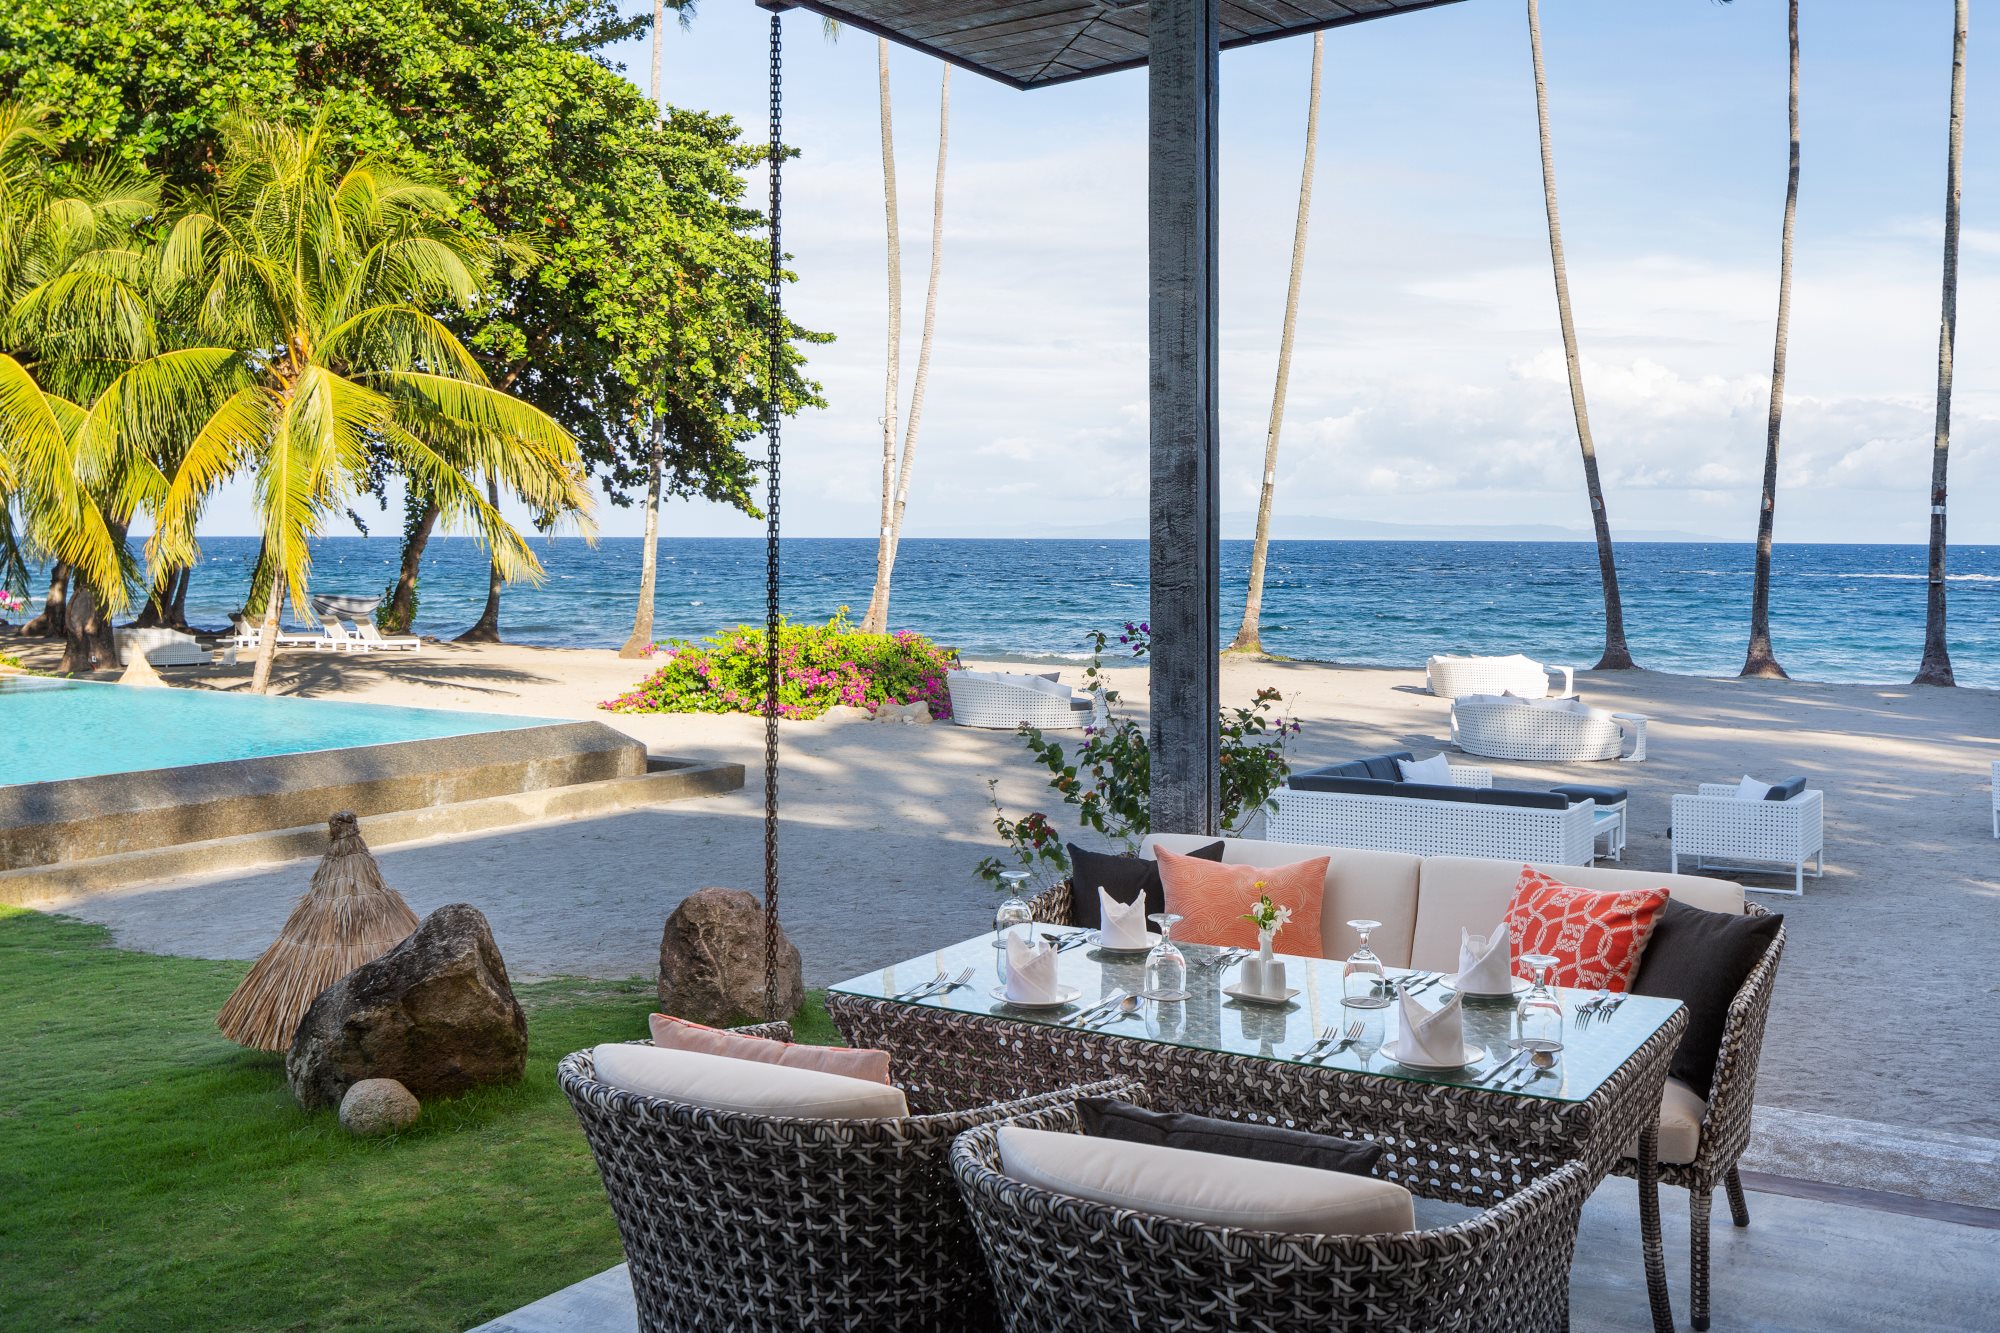 Breeze restaurant with beach and pool